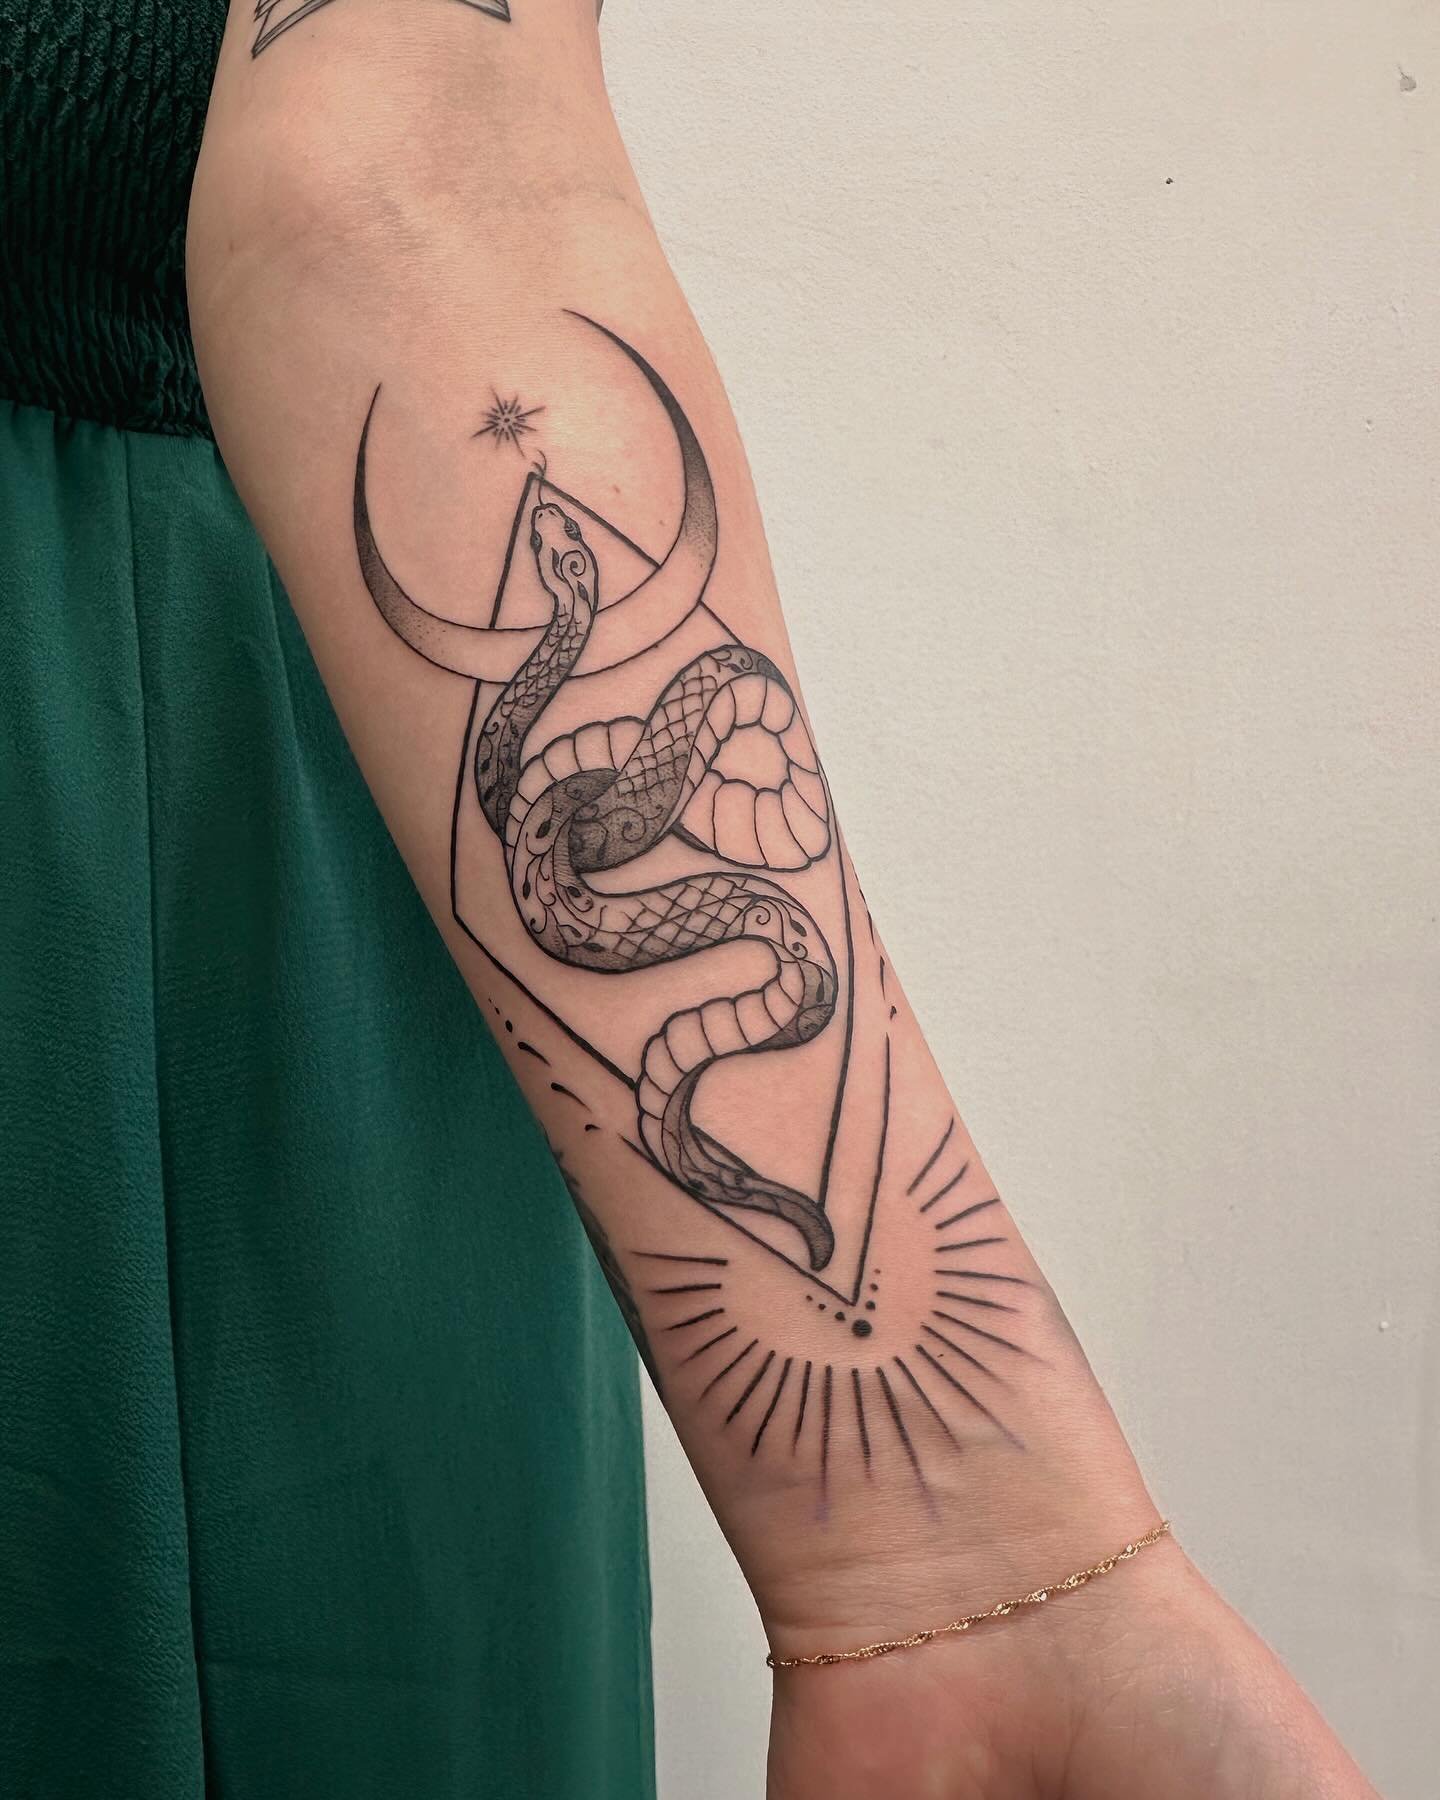 ⚜️arm adornment⚜️
Thanks so much for coming in!!
.
.
.
.
.
.
.
.
.
.
.
#tattoo #finelinetattoo #goth #gothic #mystical #pagan #witchy #witch #witchesofinstagram #snake